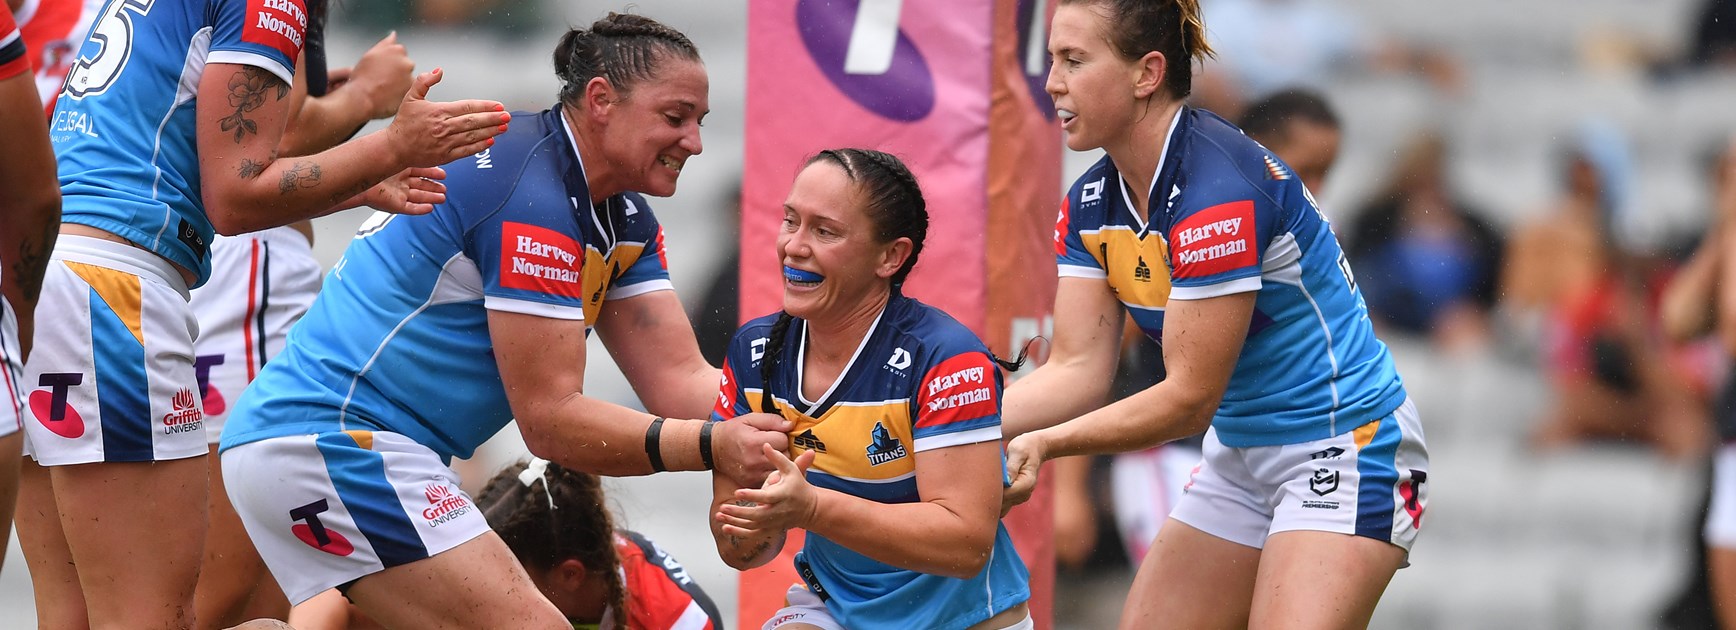 'Enjoy it, but do whatever it takes': Feeney fired up to claim NRLW derby